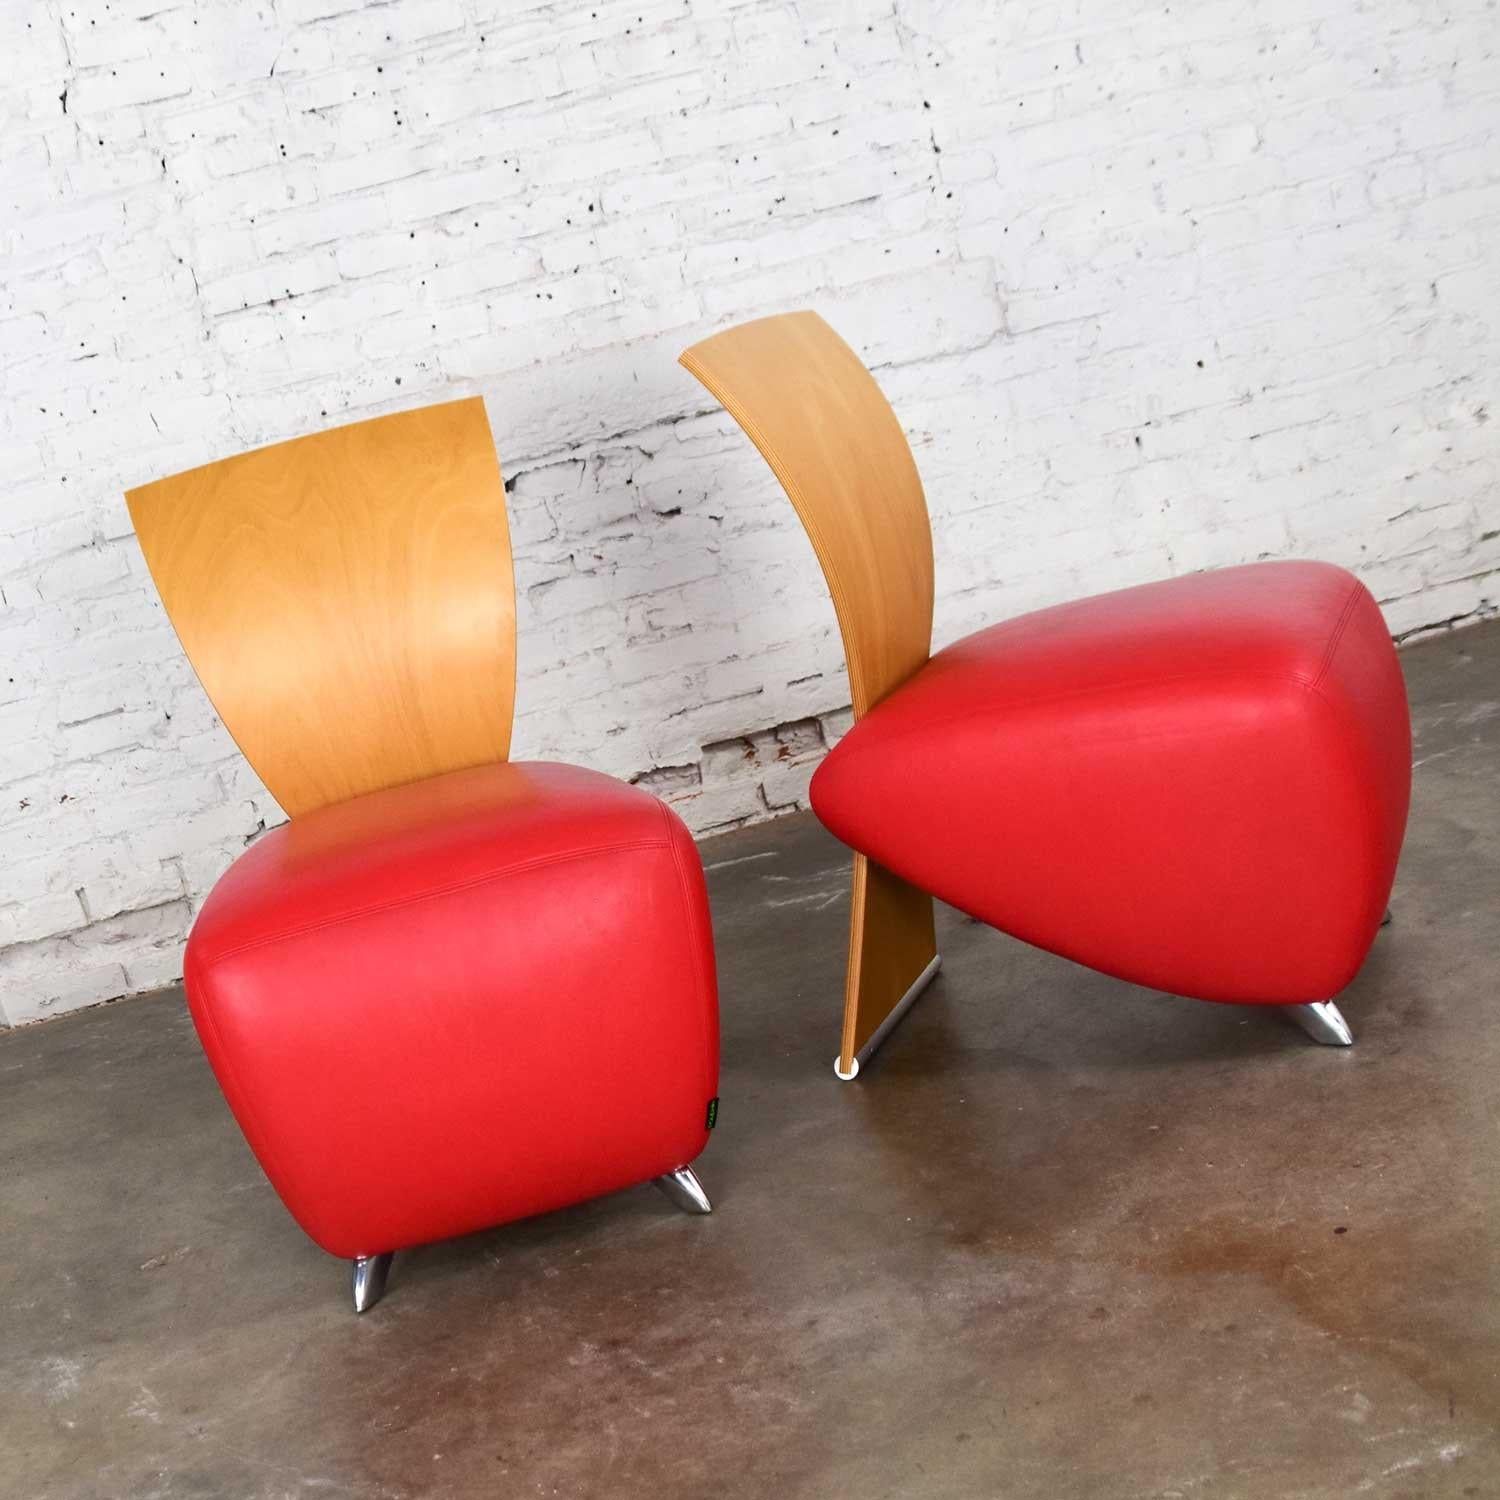 Fabulous pair of Dauphin BOBO Postmodern accent chairs by Dietmar Sharping with red leather seat, polished aluminum feet, and molded maple plywood curved back. Gorgeous almost new condition with age-appropriate wear. Please see photos, circa late